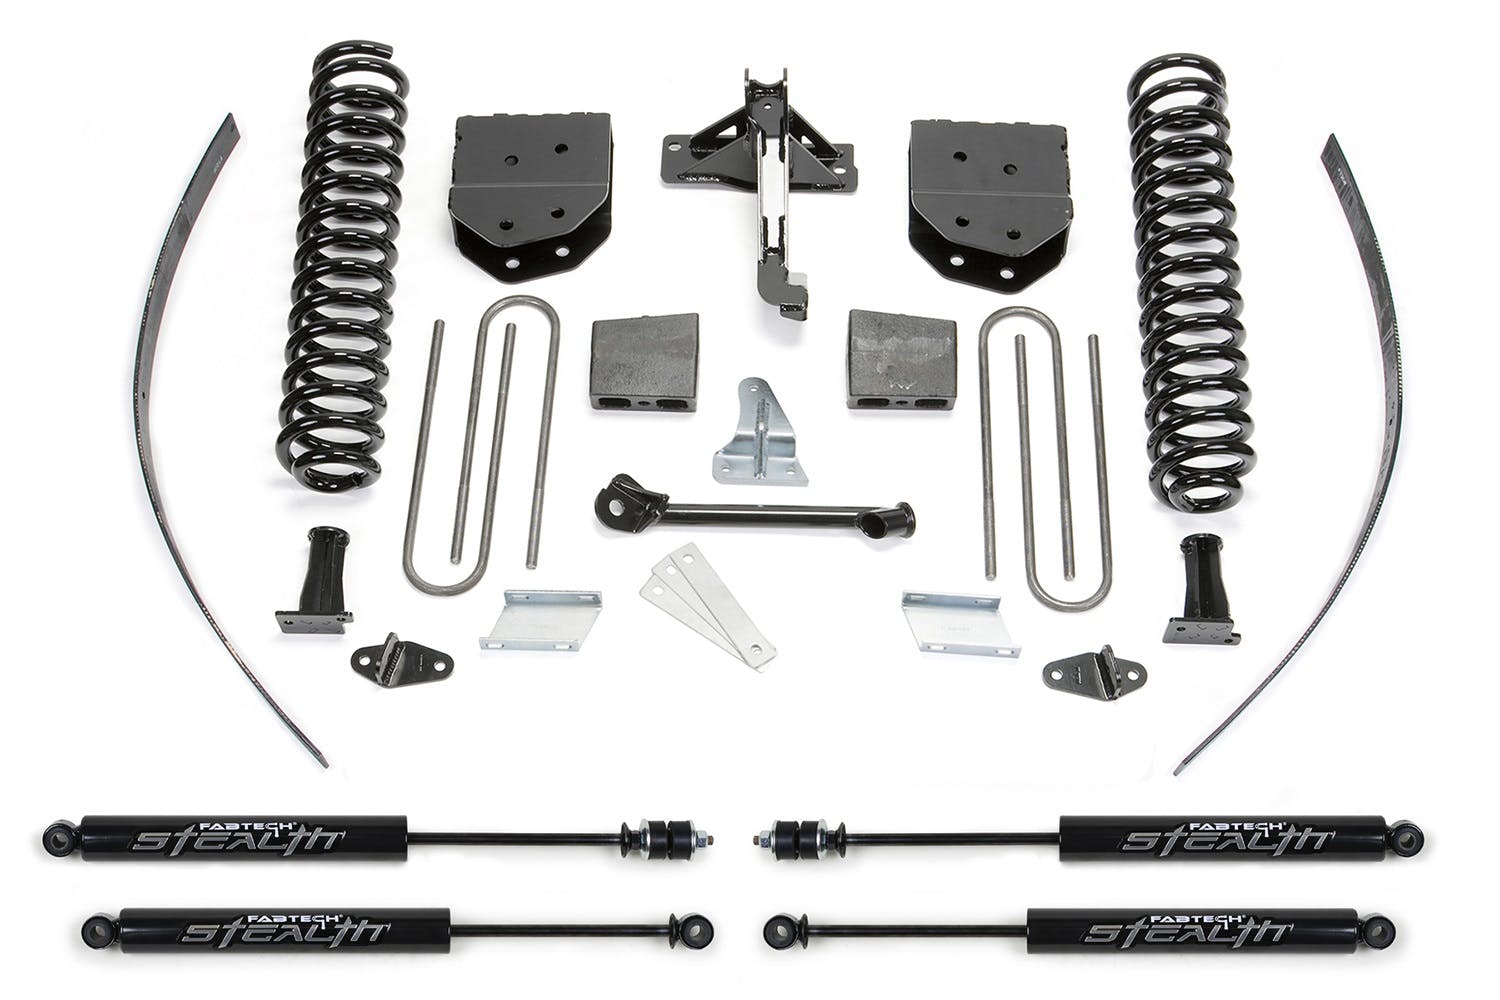 Fabtech K2122M 8in. BASIC SYS W/STEALTH 2008-15 FORD F250 4WD W/FACTORY OVERLOAD